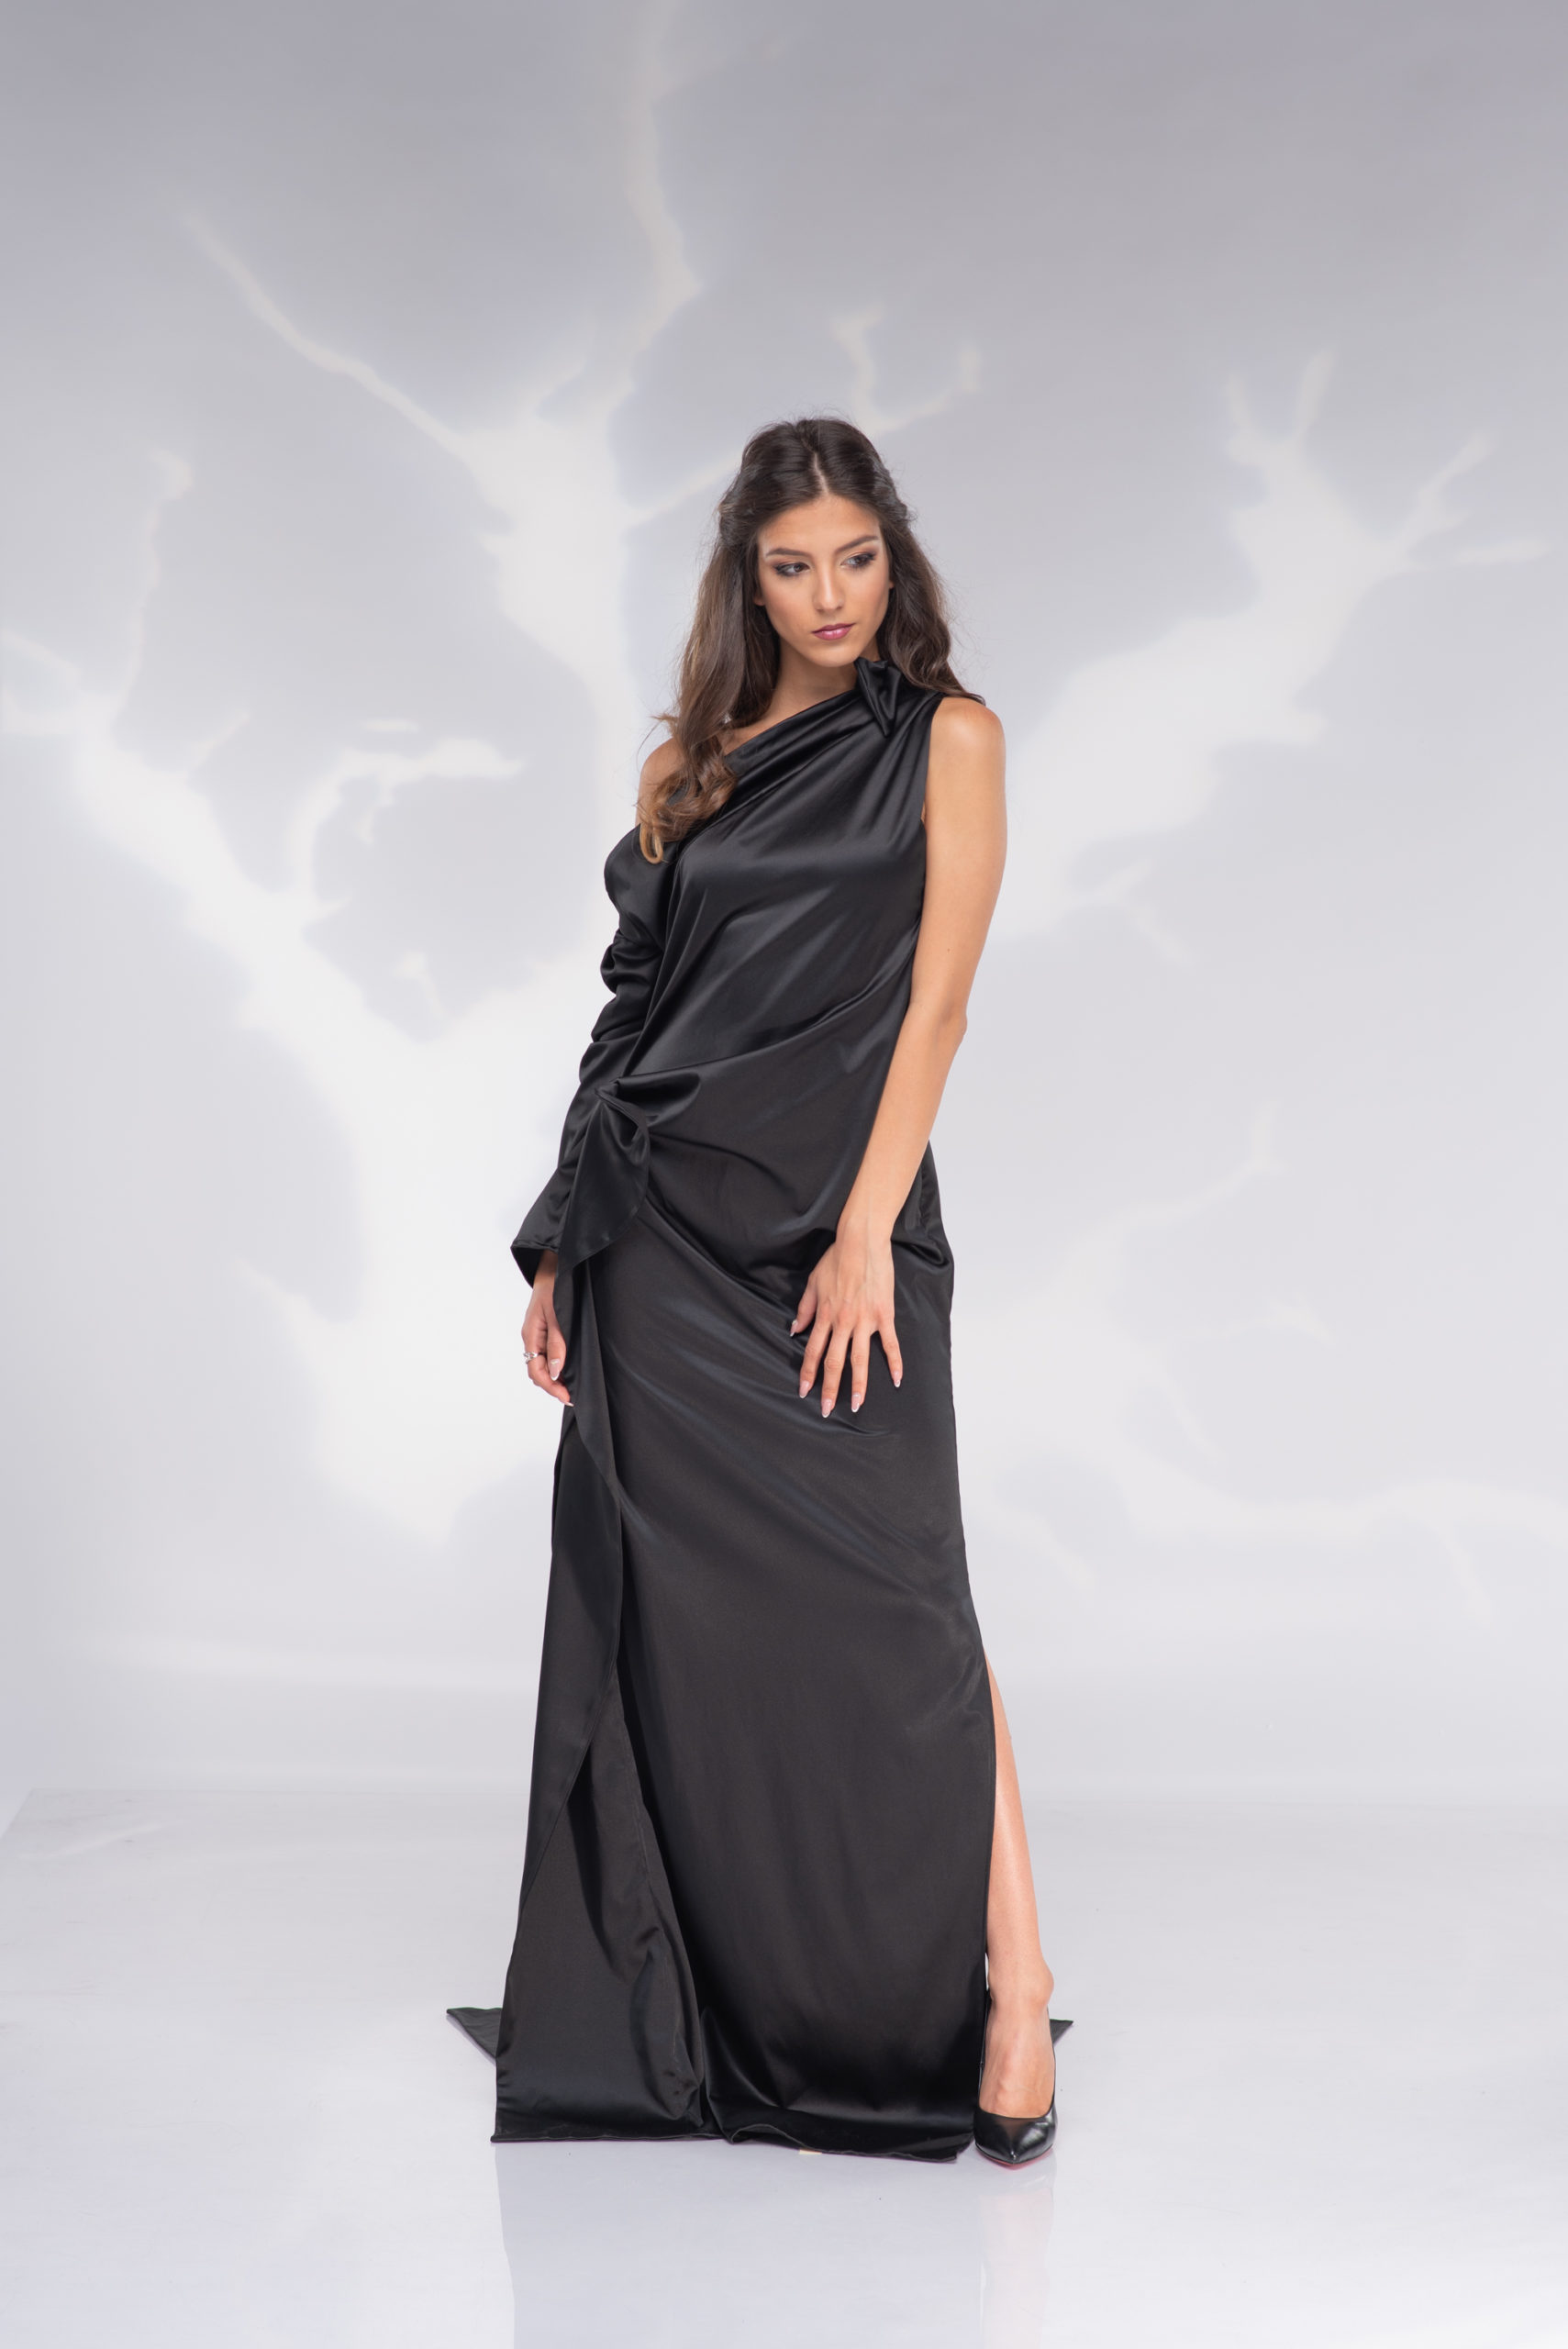 Women Formal Party Noble and Elegant Evening Dress - The Little Connection